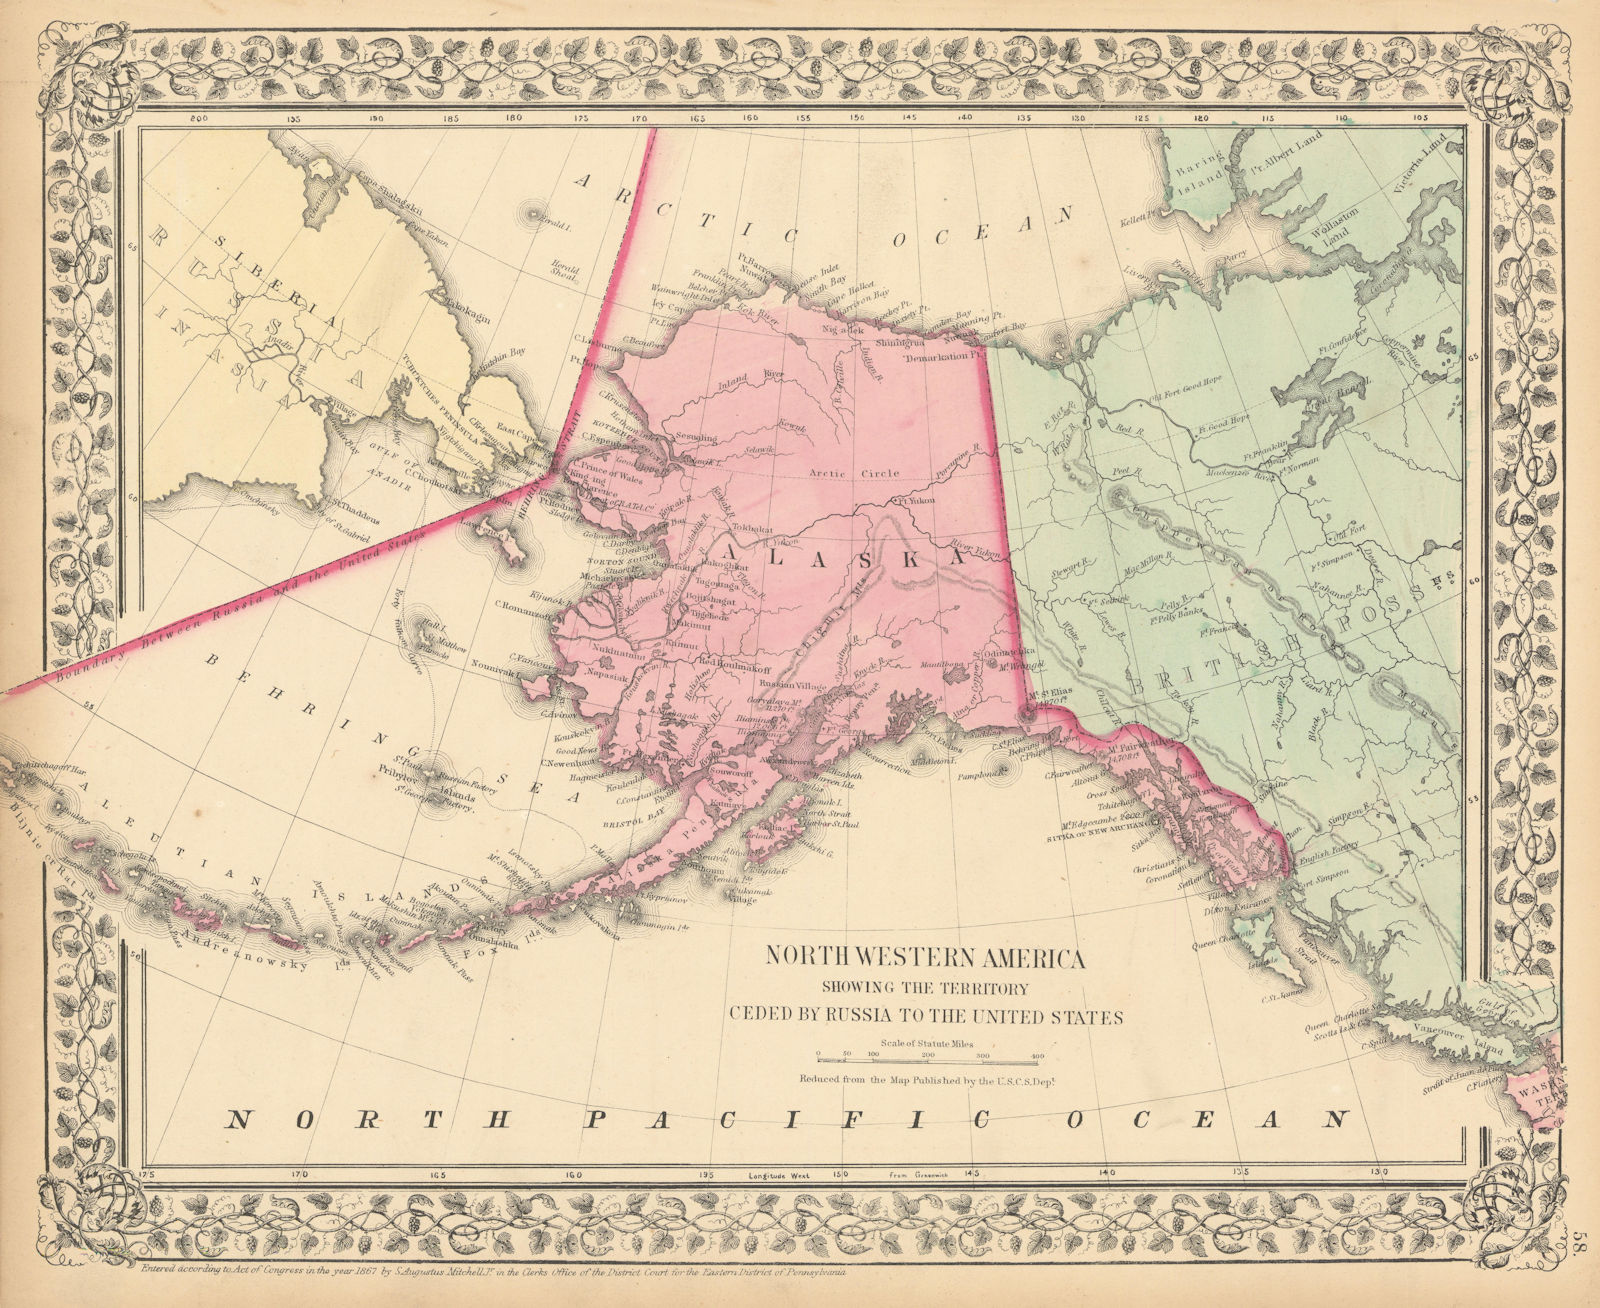 Northwestern America showing… Territory ceded by Russia Alaska MITCHELL 1869 map